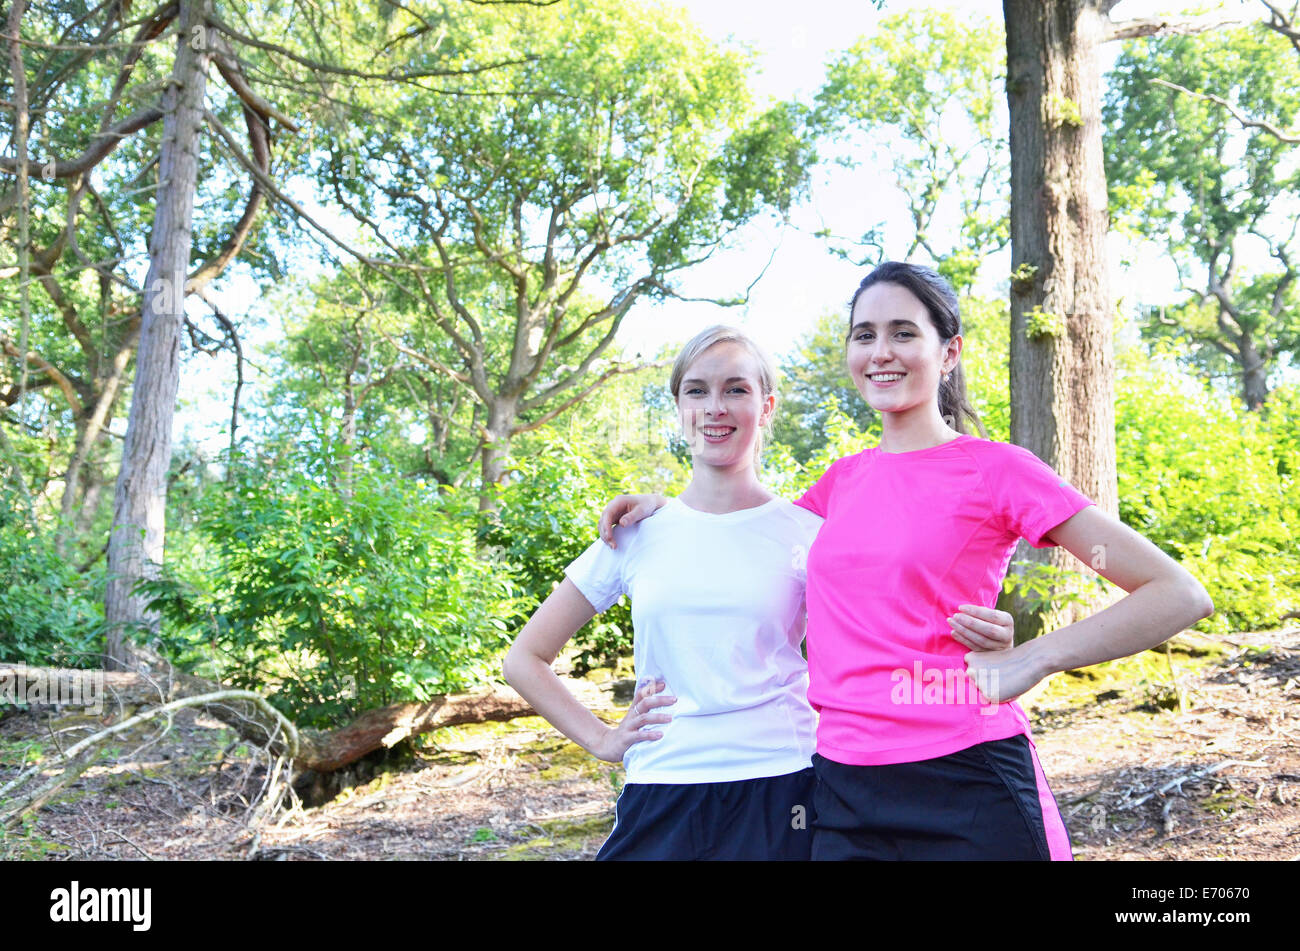 Portrait of two young women runners in forest Stock Photo